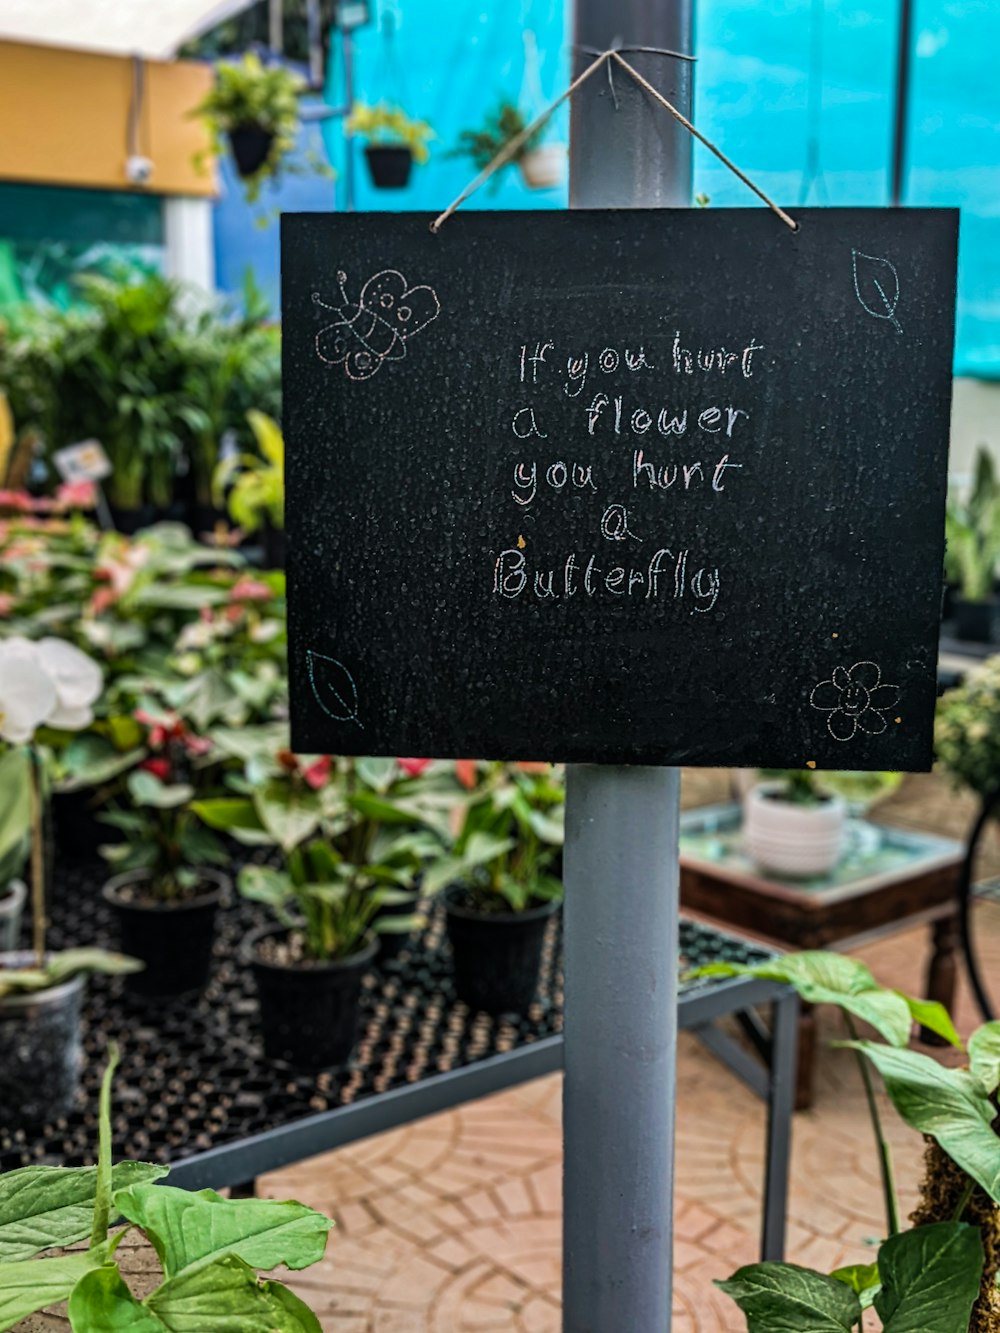 a sign that says if you have a flower you have a butterfly